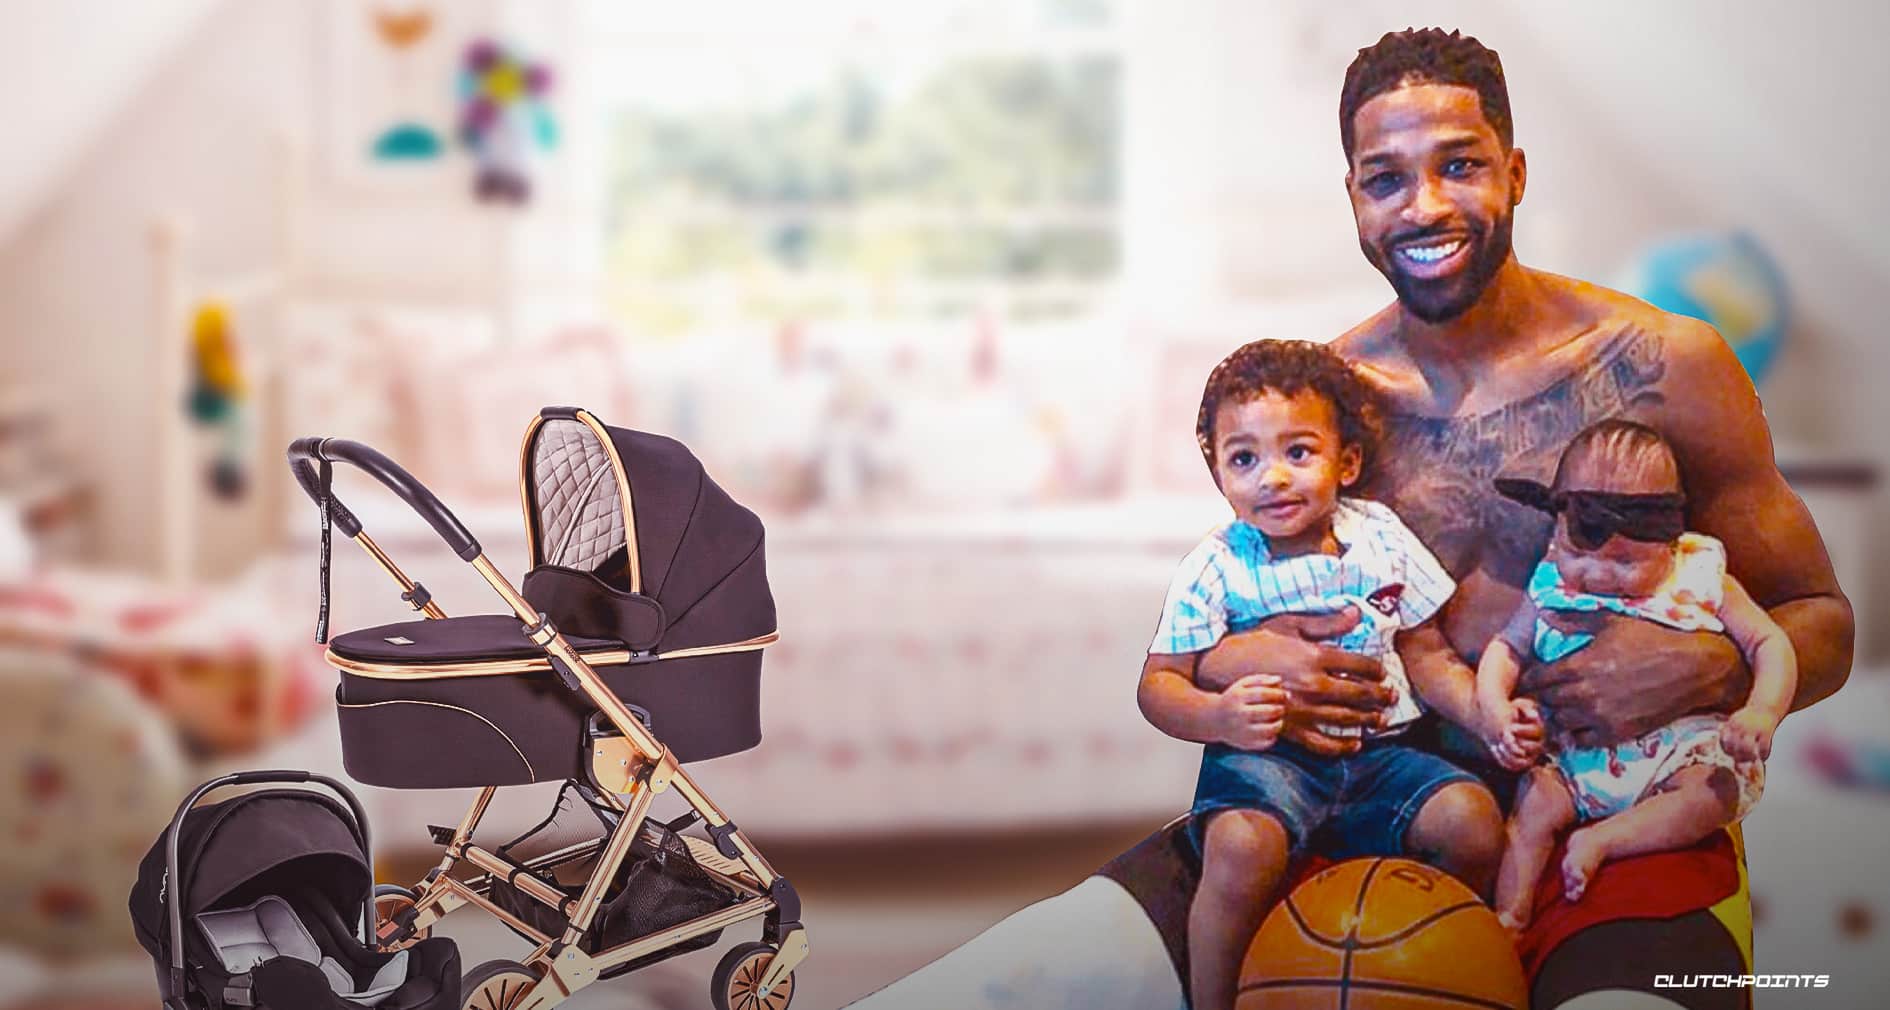 ”tristan-thompson-is-in-trouble-woman-alleges-she-is-carrying-his-child-learn-more-details”